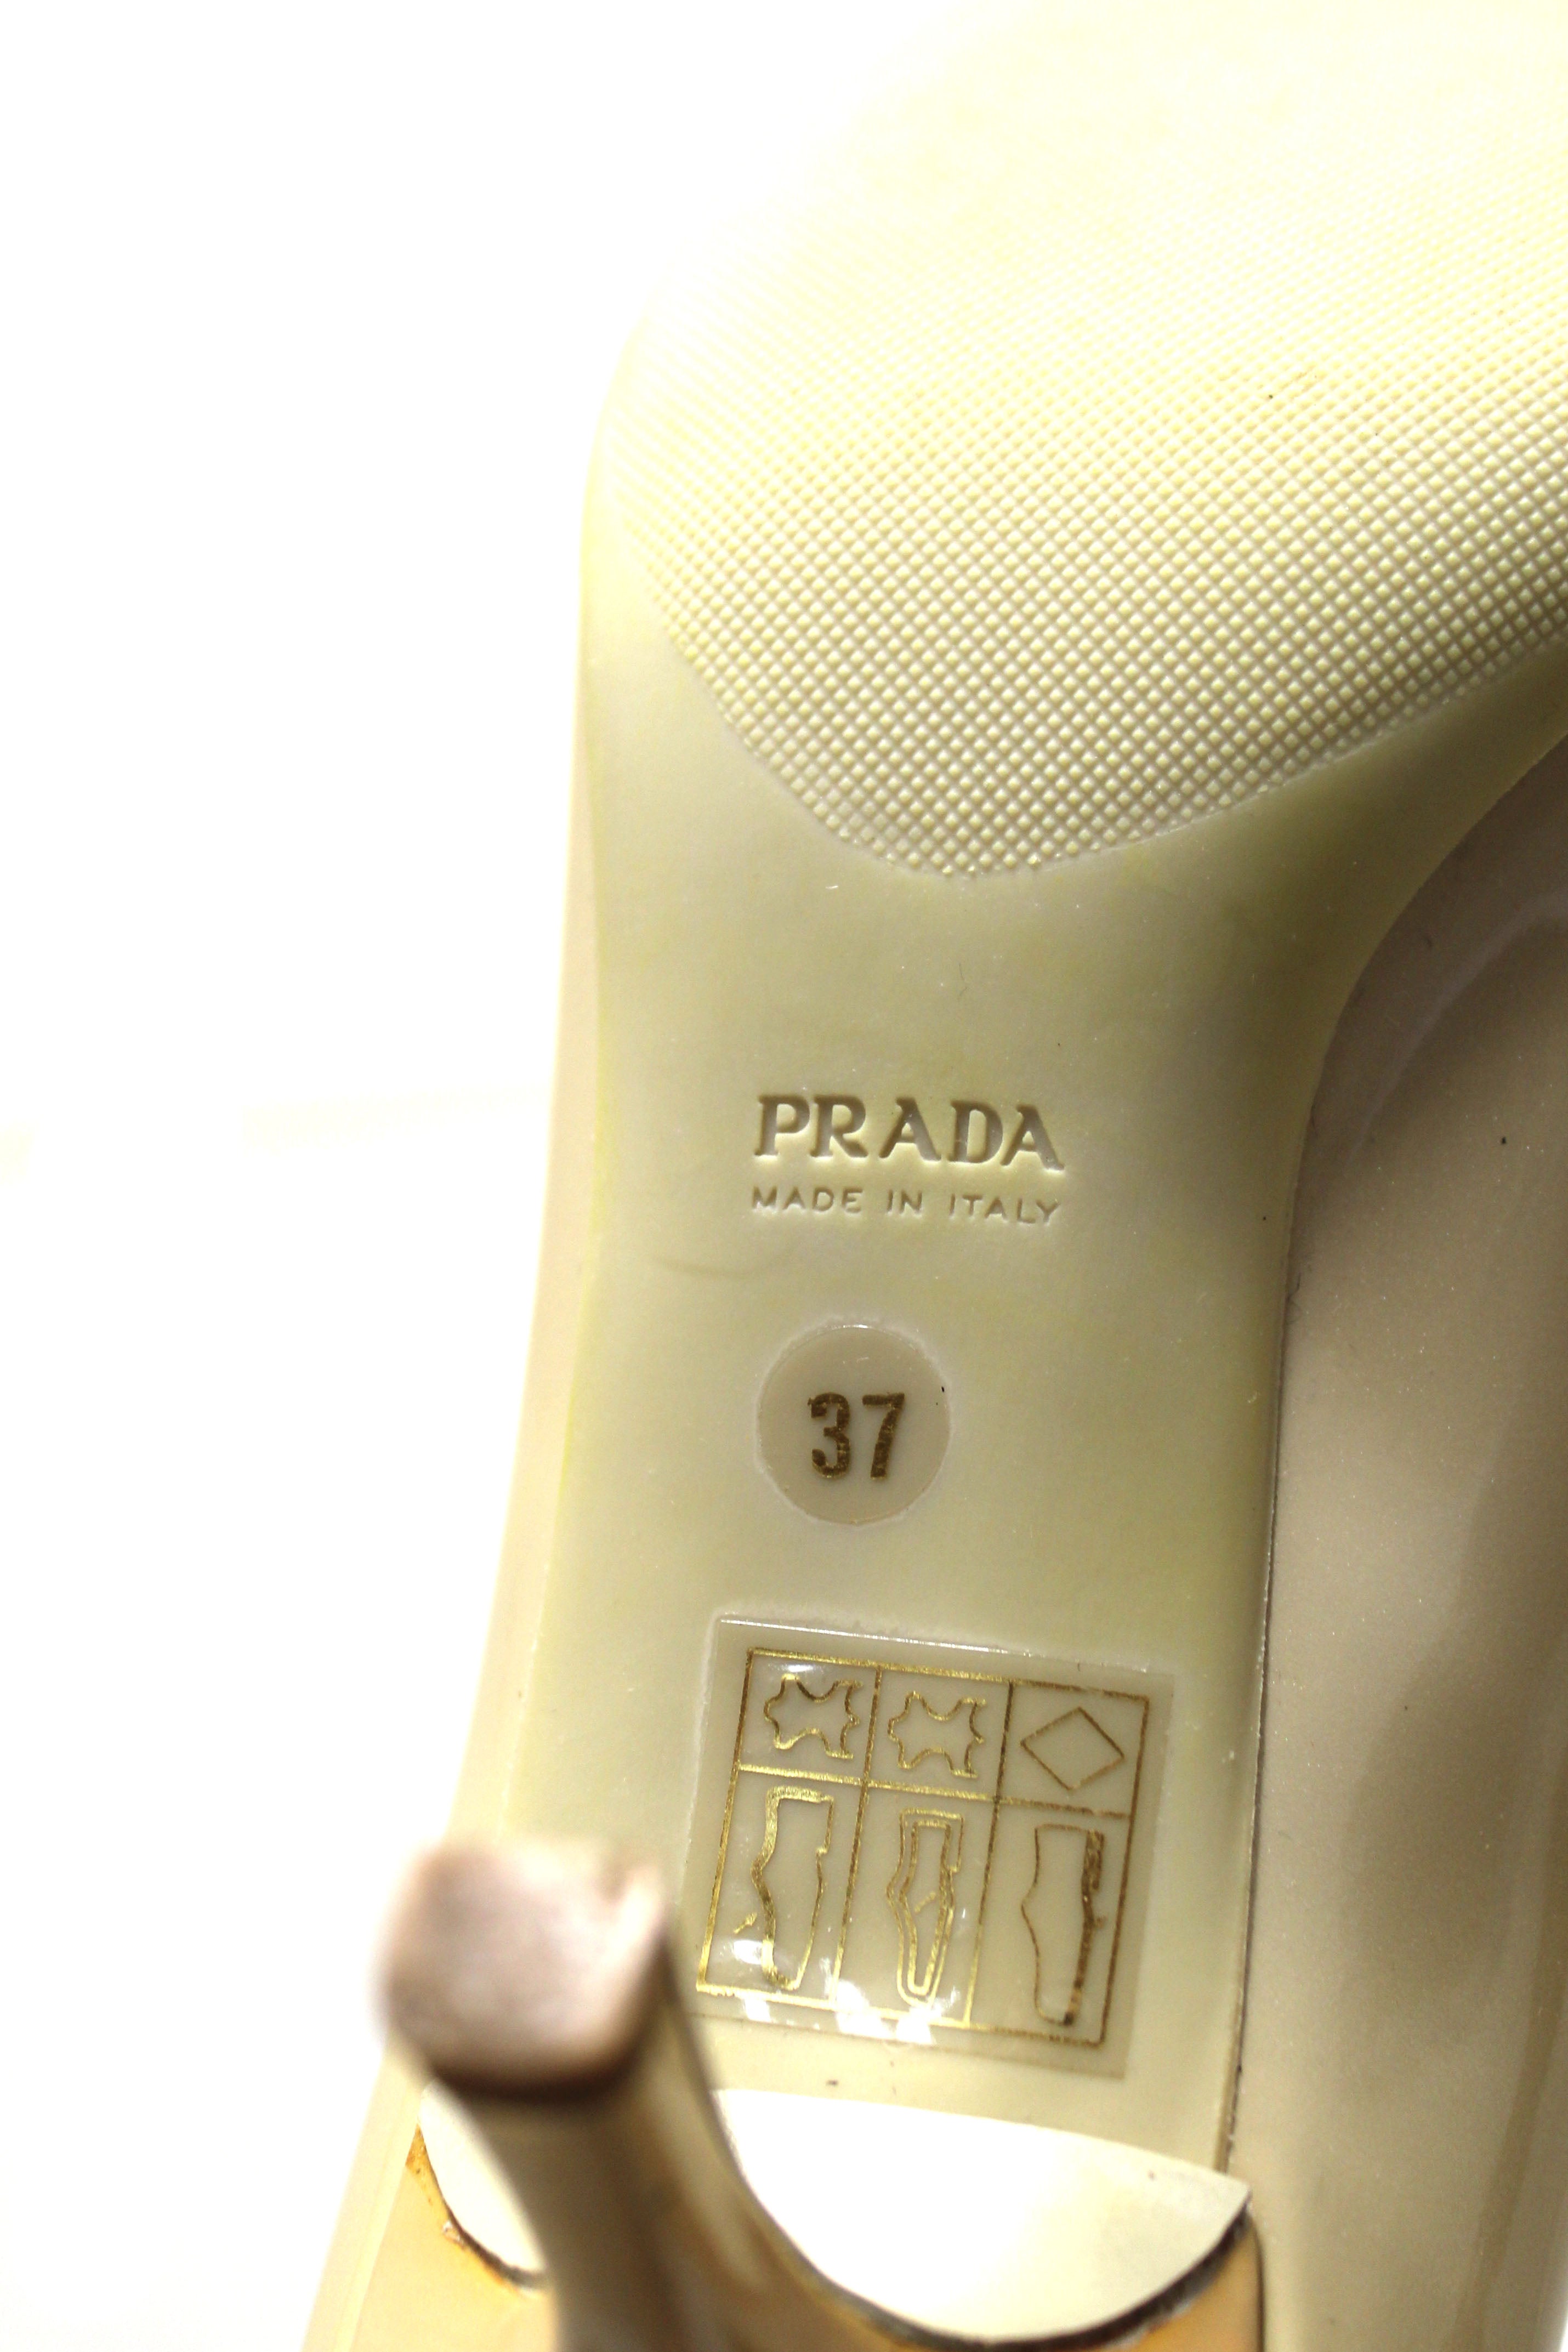 Authentic Prada Calzature Donna Shimmer Beige Bow Patent Leather Kitten Heel Shoes Size 37